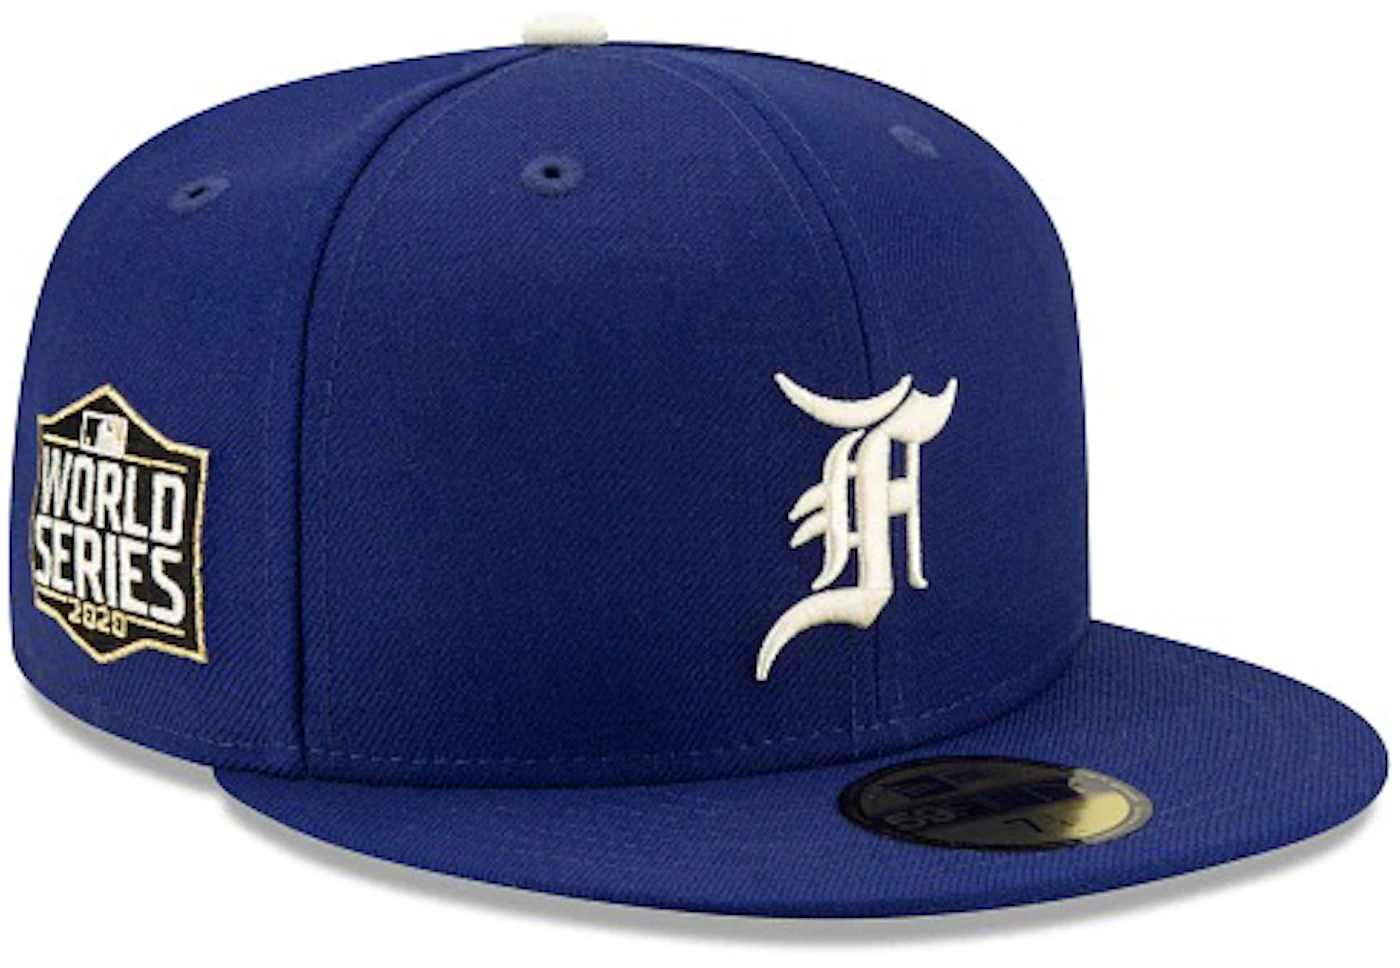 https://images.stockx.com/images/Fear-of-God-Eseentials-New-Era-59Fifty-2020-World-Series-Patch-Fitted-Hat-Dark-Royal.jpg?fit=fill&bg=FFFFFF&w=700&h=500&fm=webp&auto=compress&q=90&dpr=2&trim=color&updated_at=1629728723